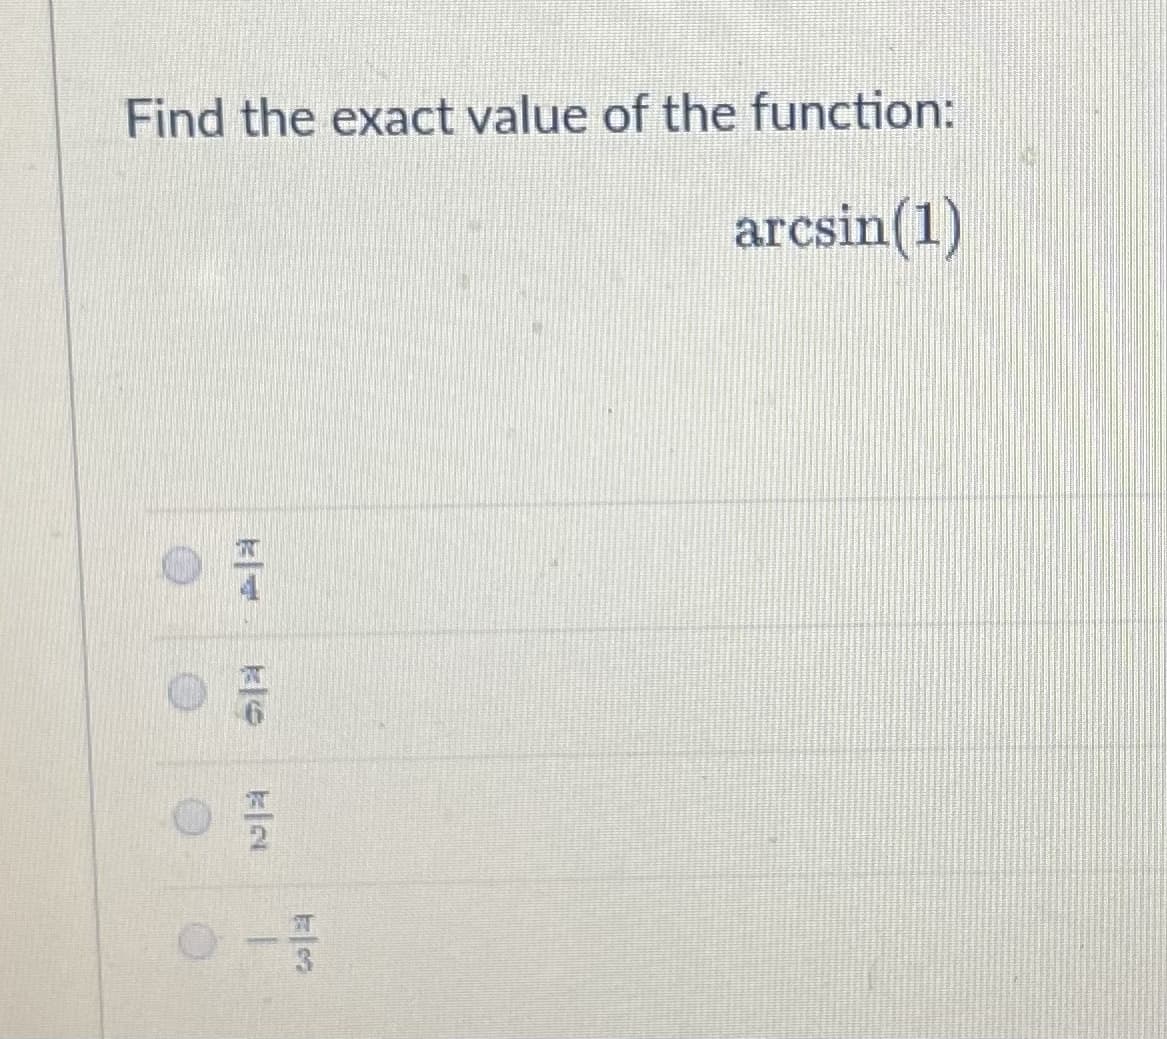 Find the exact value of the function:
arcsin(1)
ka
0-3